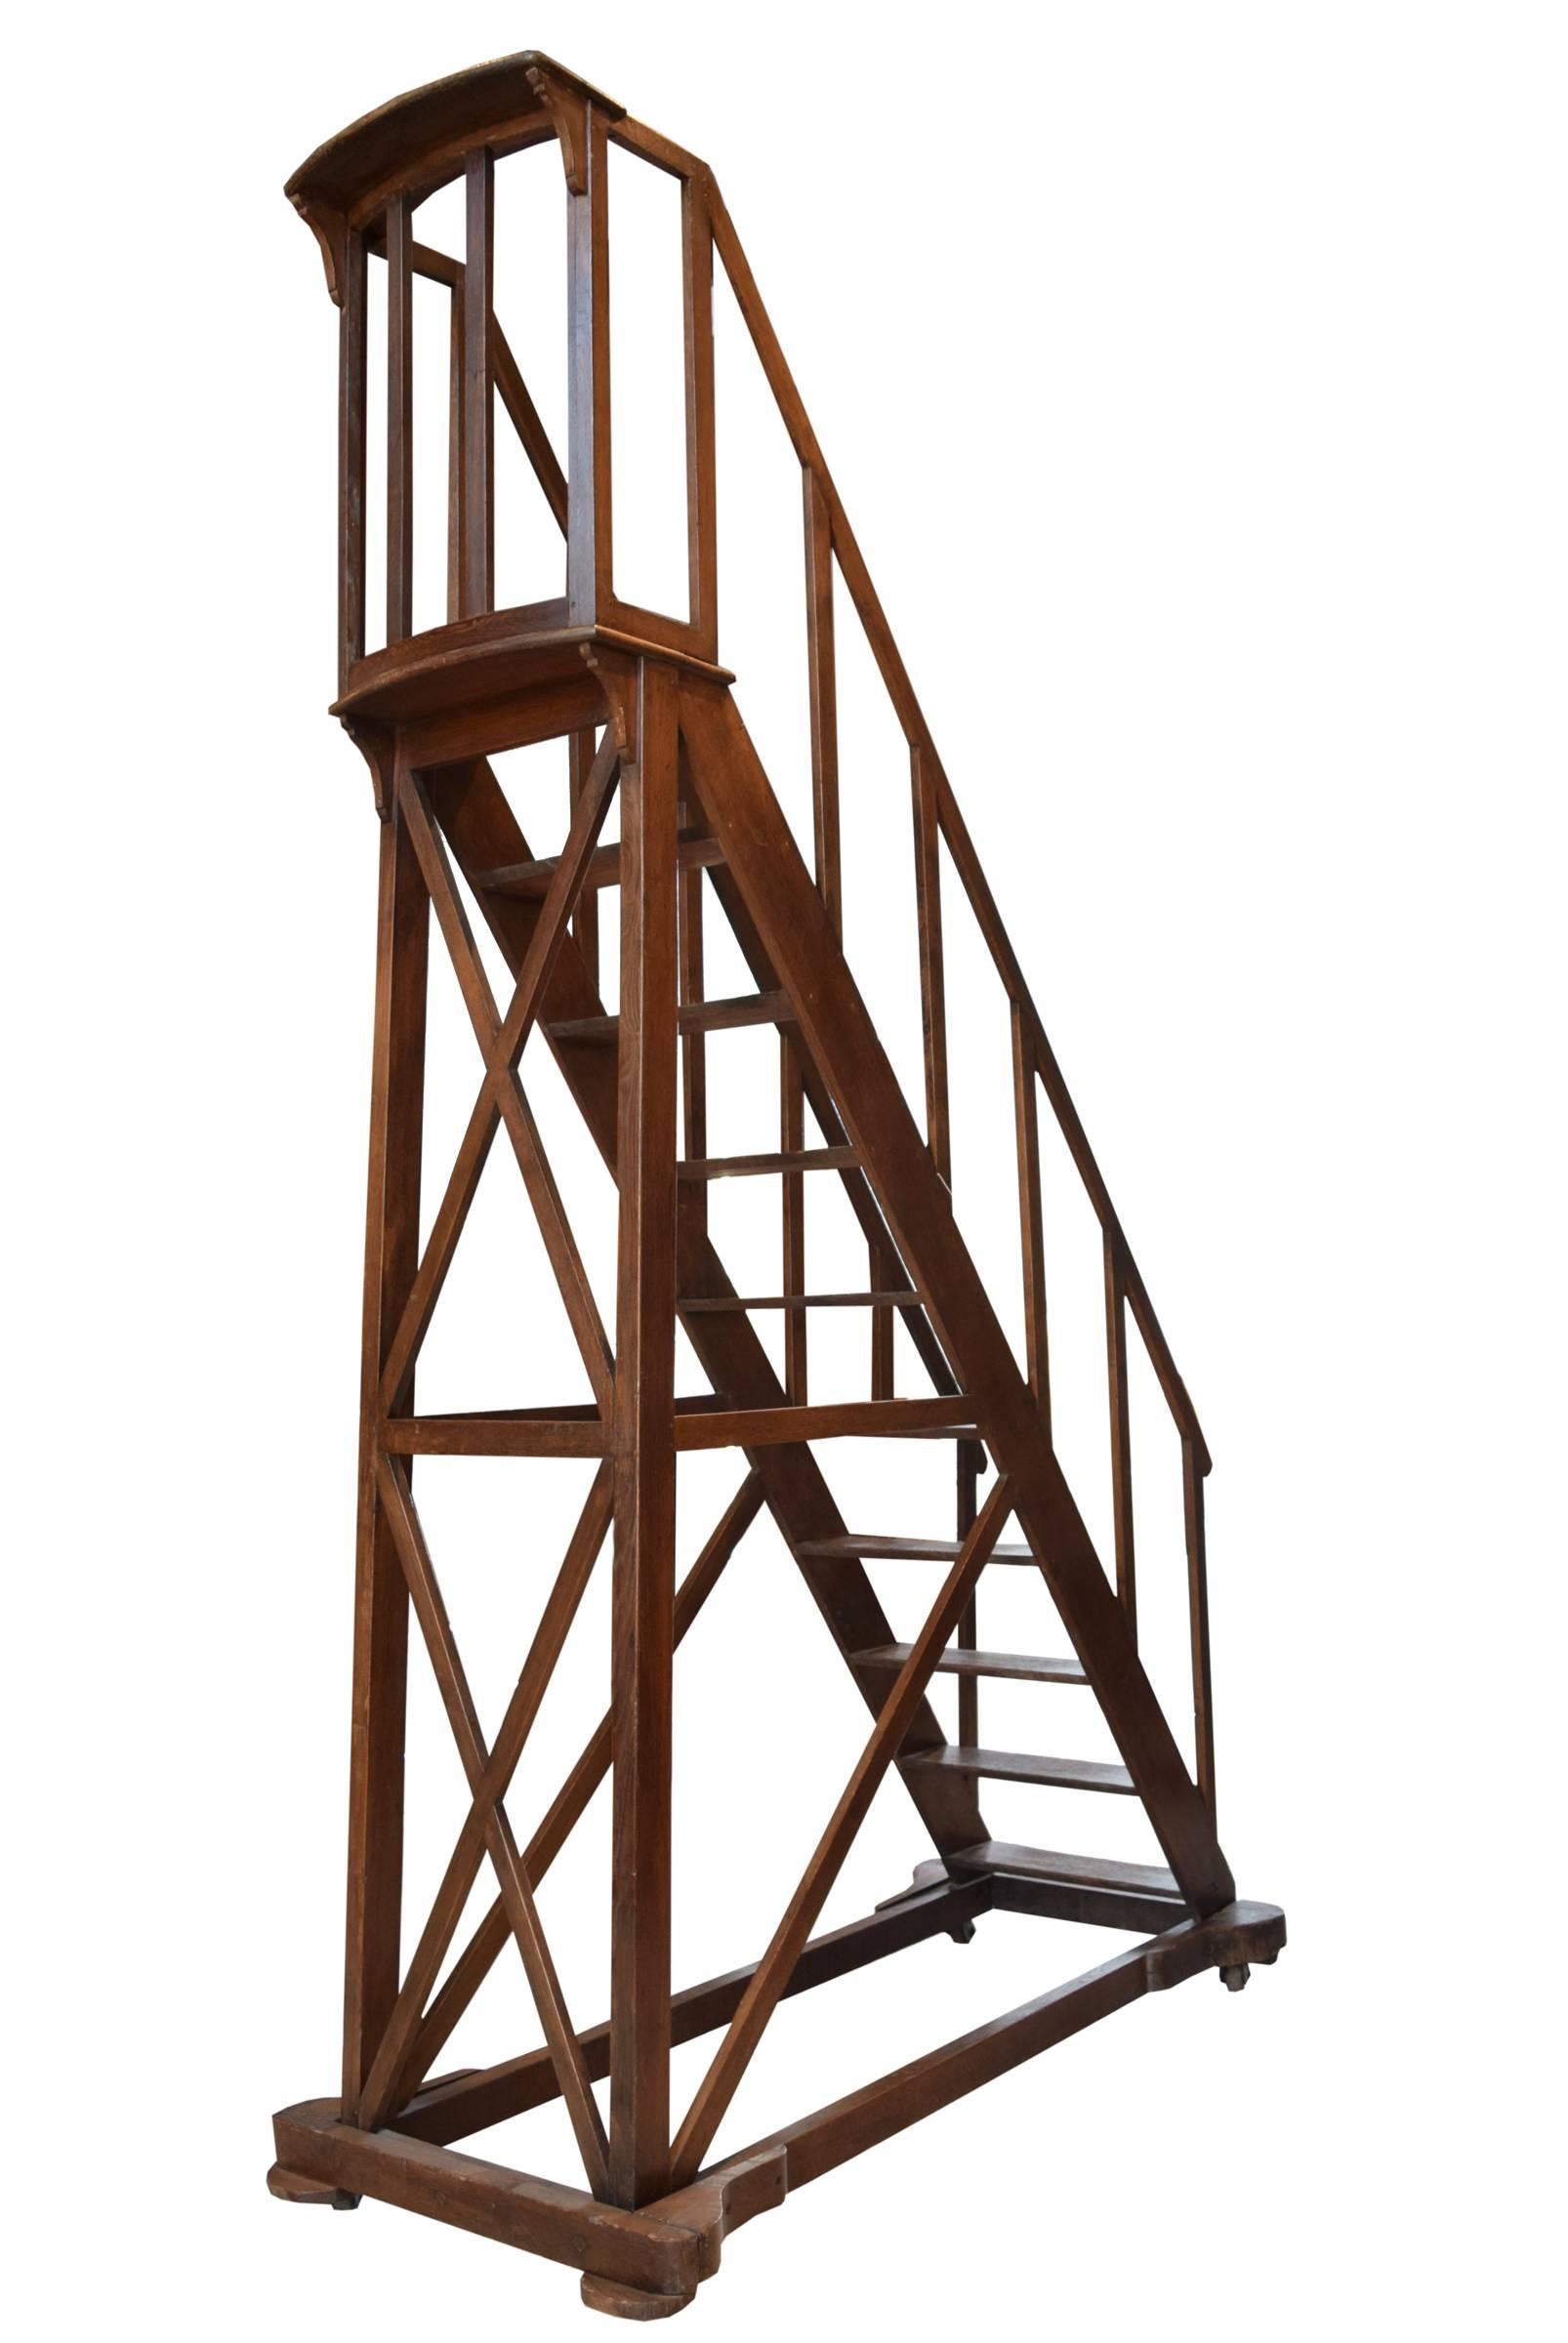 A tall ten-step library ladder on castors from France. This rare 19th century ladder has handrails along the sides as well as a tall railing at the top. The top step is 7.5 feet tall.